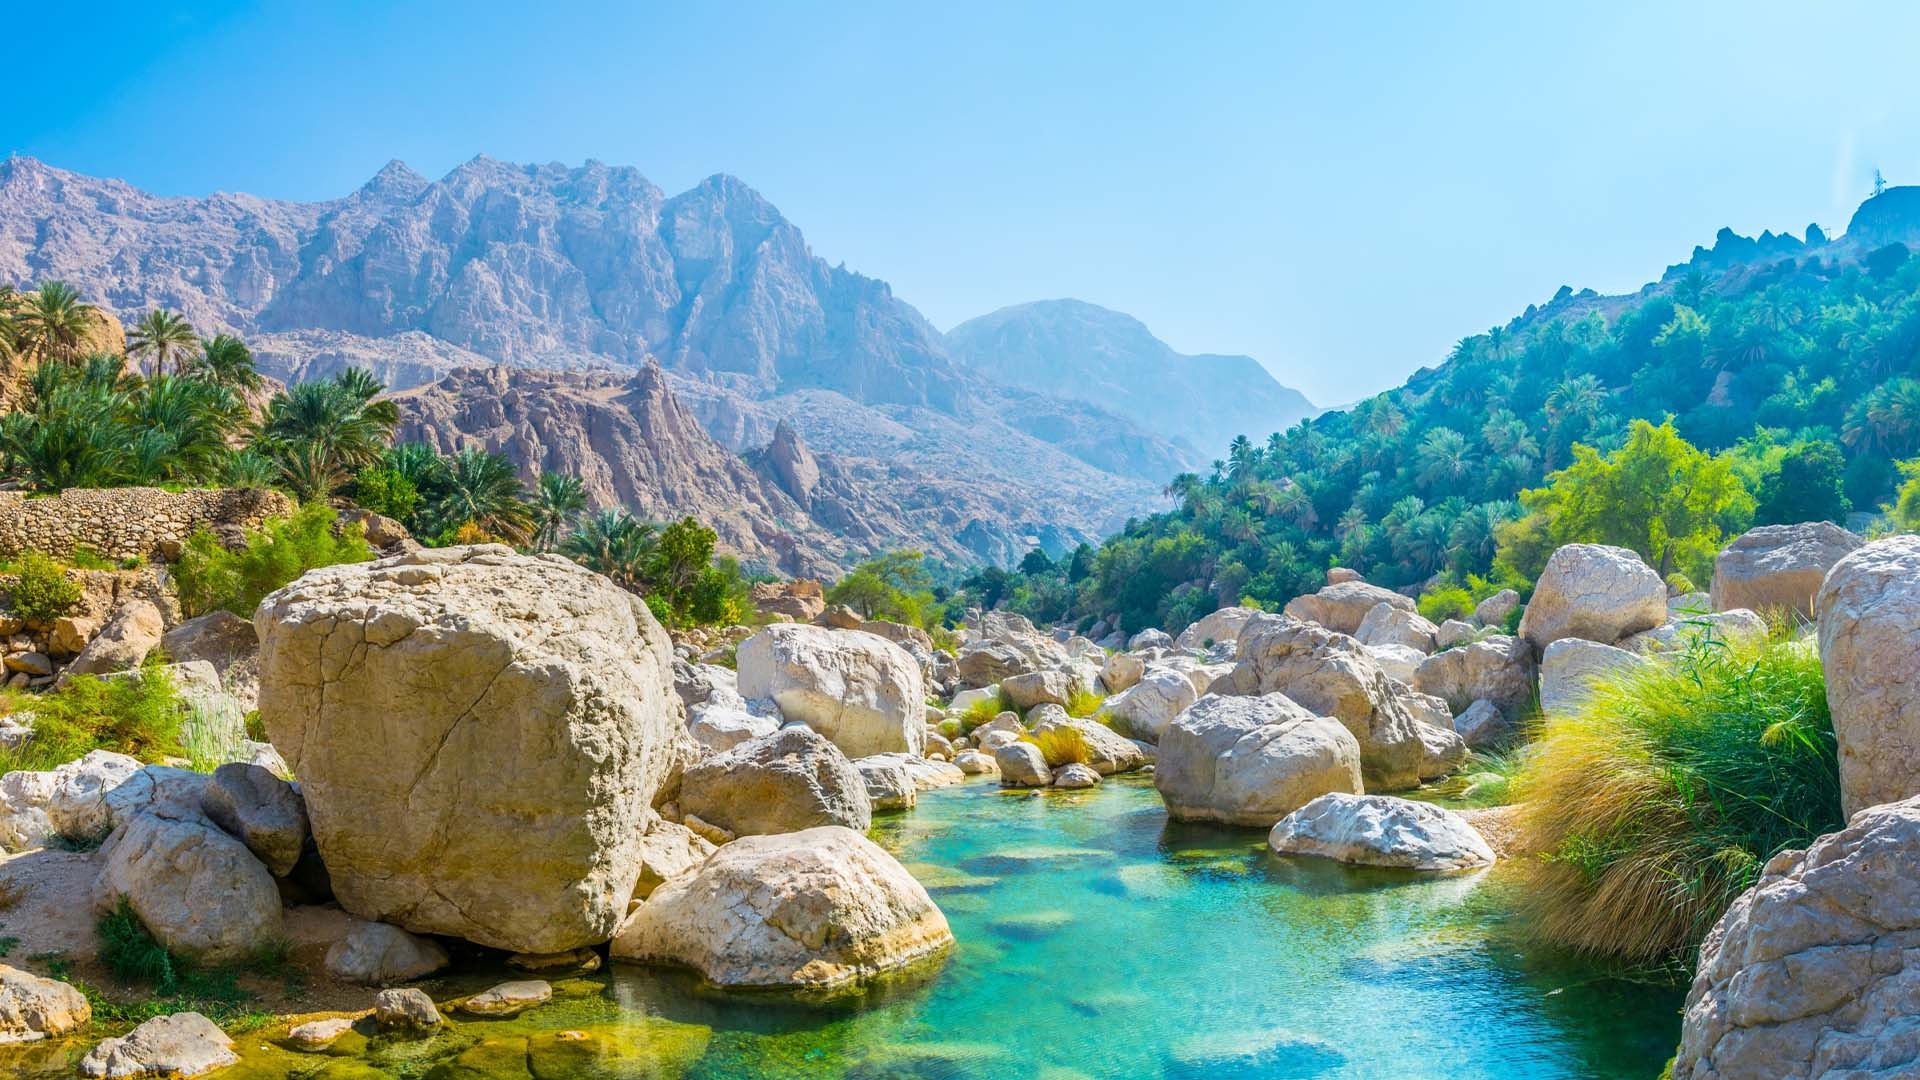 A panoramic photograph immortalizes the incredible Wadi Tiwi, enveloped by lush greenery and framed by scenic mountains, creating a mesmerizing and picturesque setting.